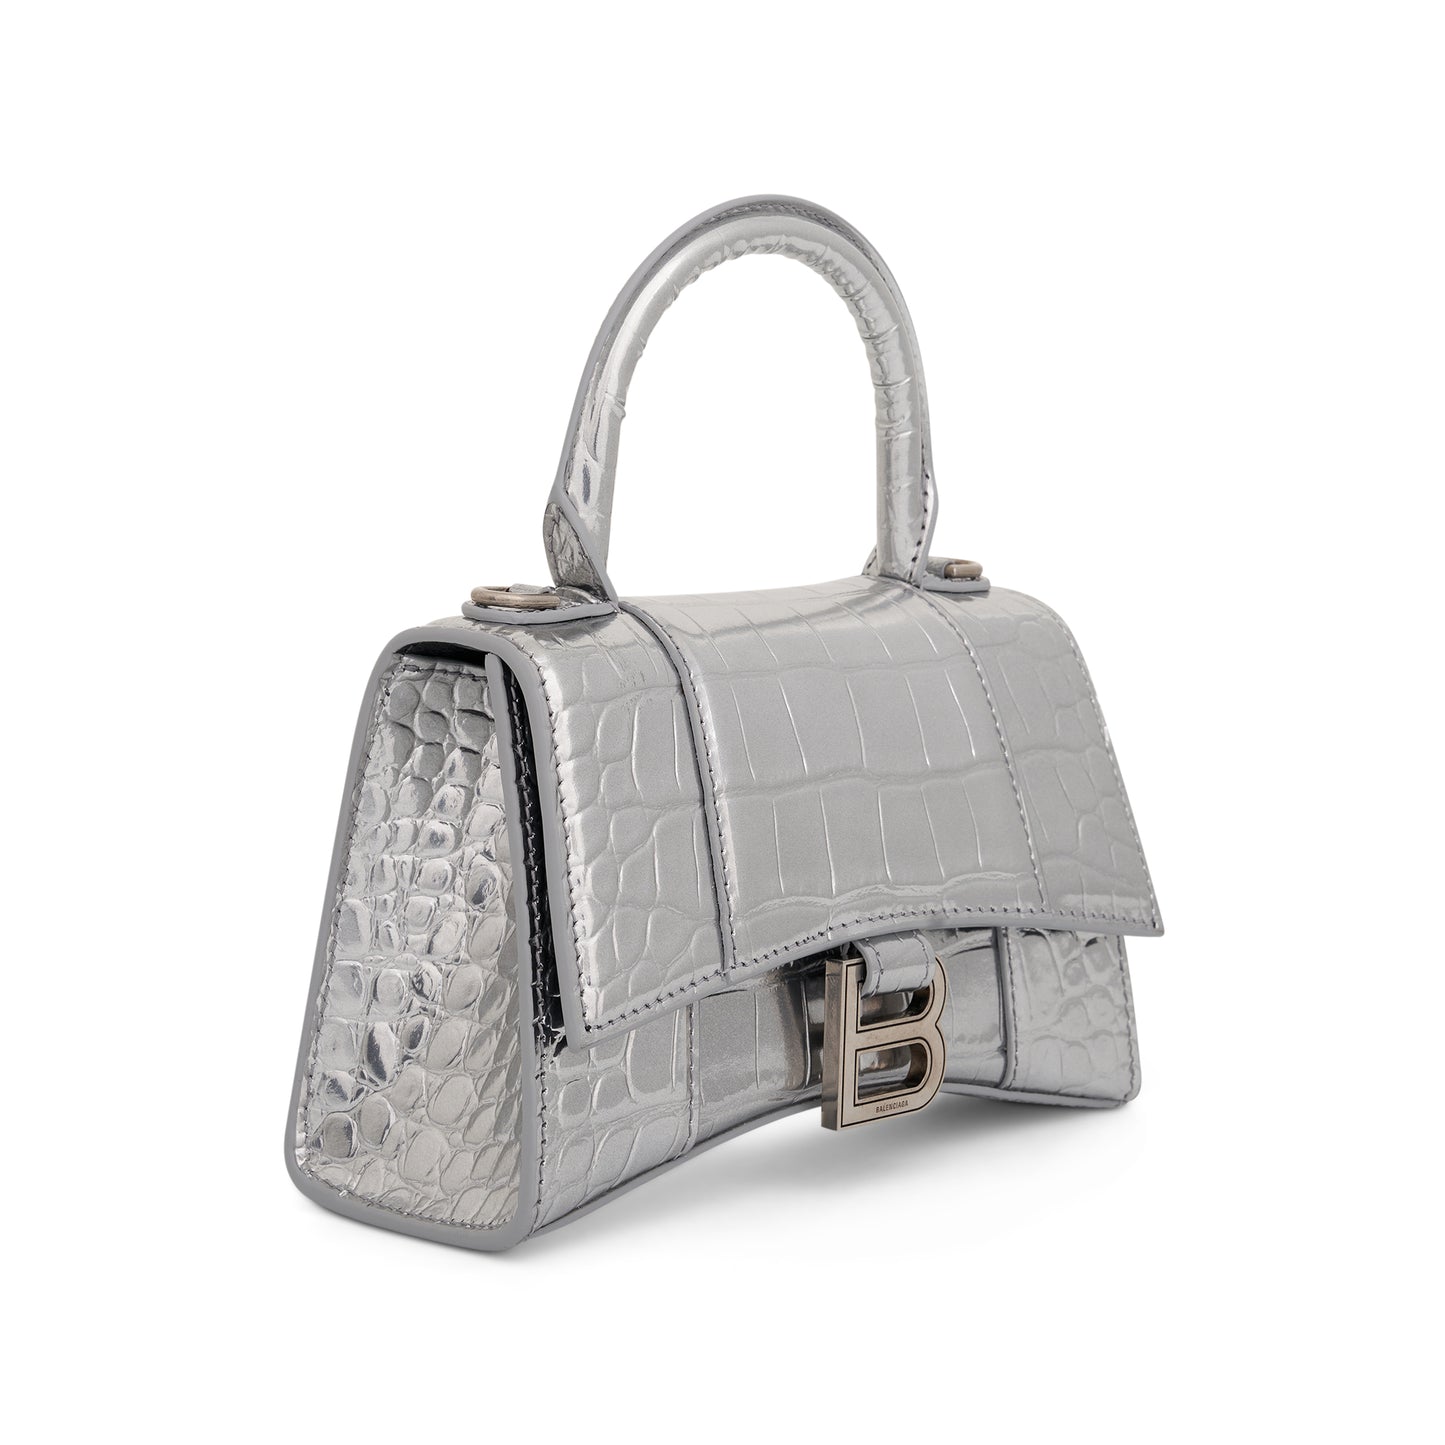 Hourglass XS Croco Embossed Bag in Silver